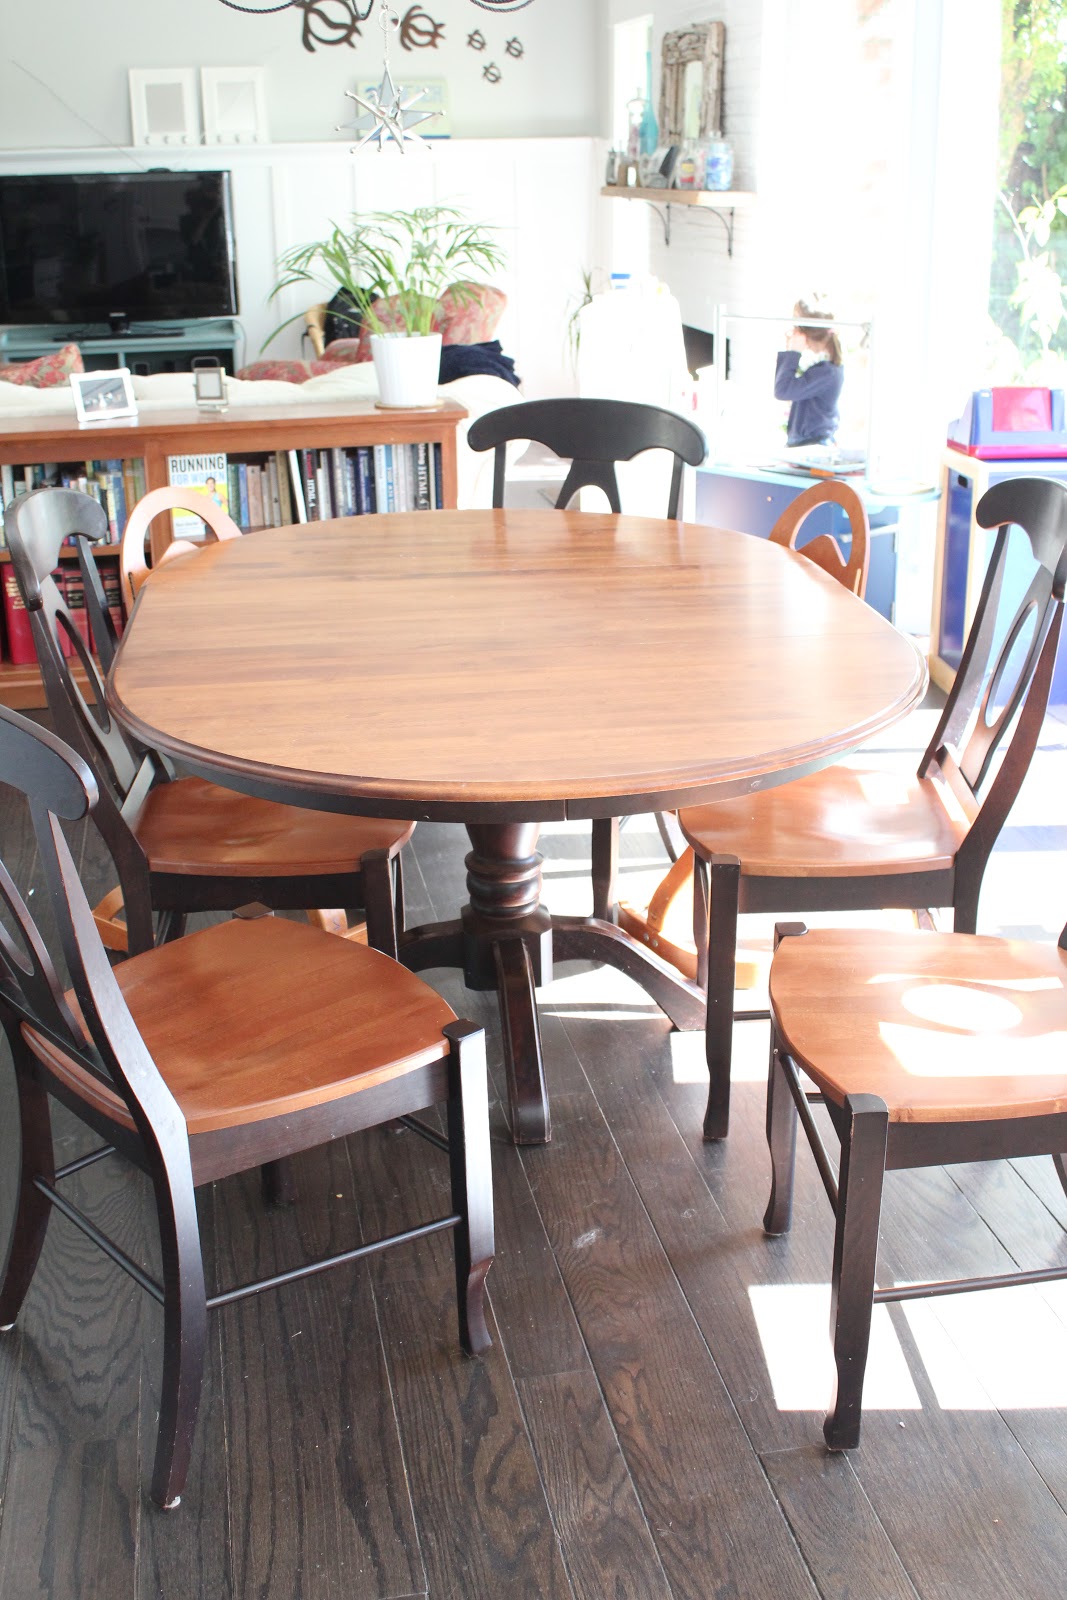 Refinishing Dining Room Table and Chairs